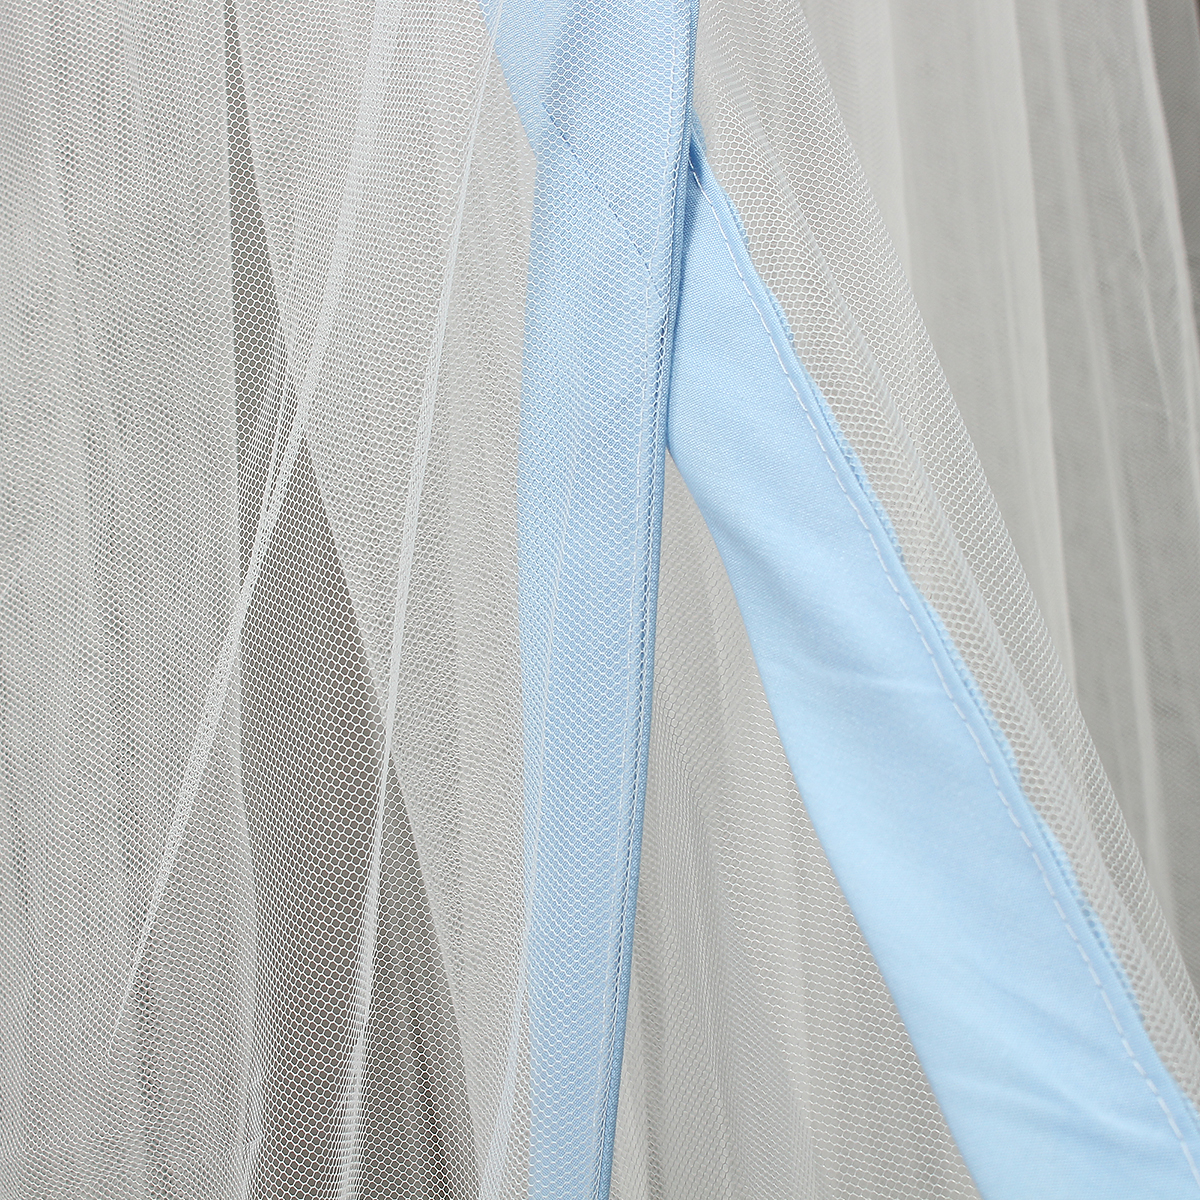 Mosquito-Net-Children-Bed-Curtain-Dome-Cot-Netting-Drape-Stand-Insect-Protection-1818006-8